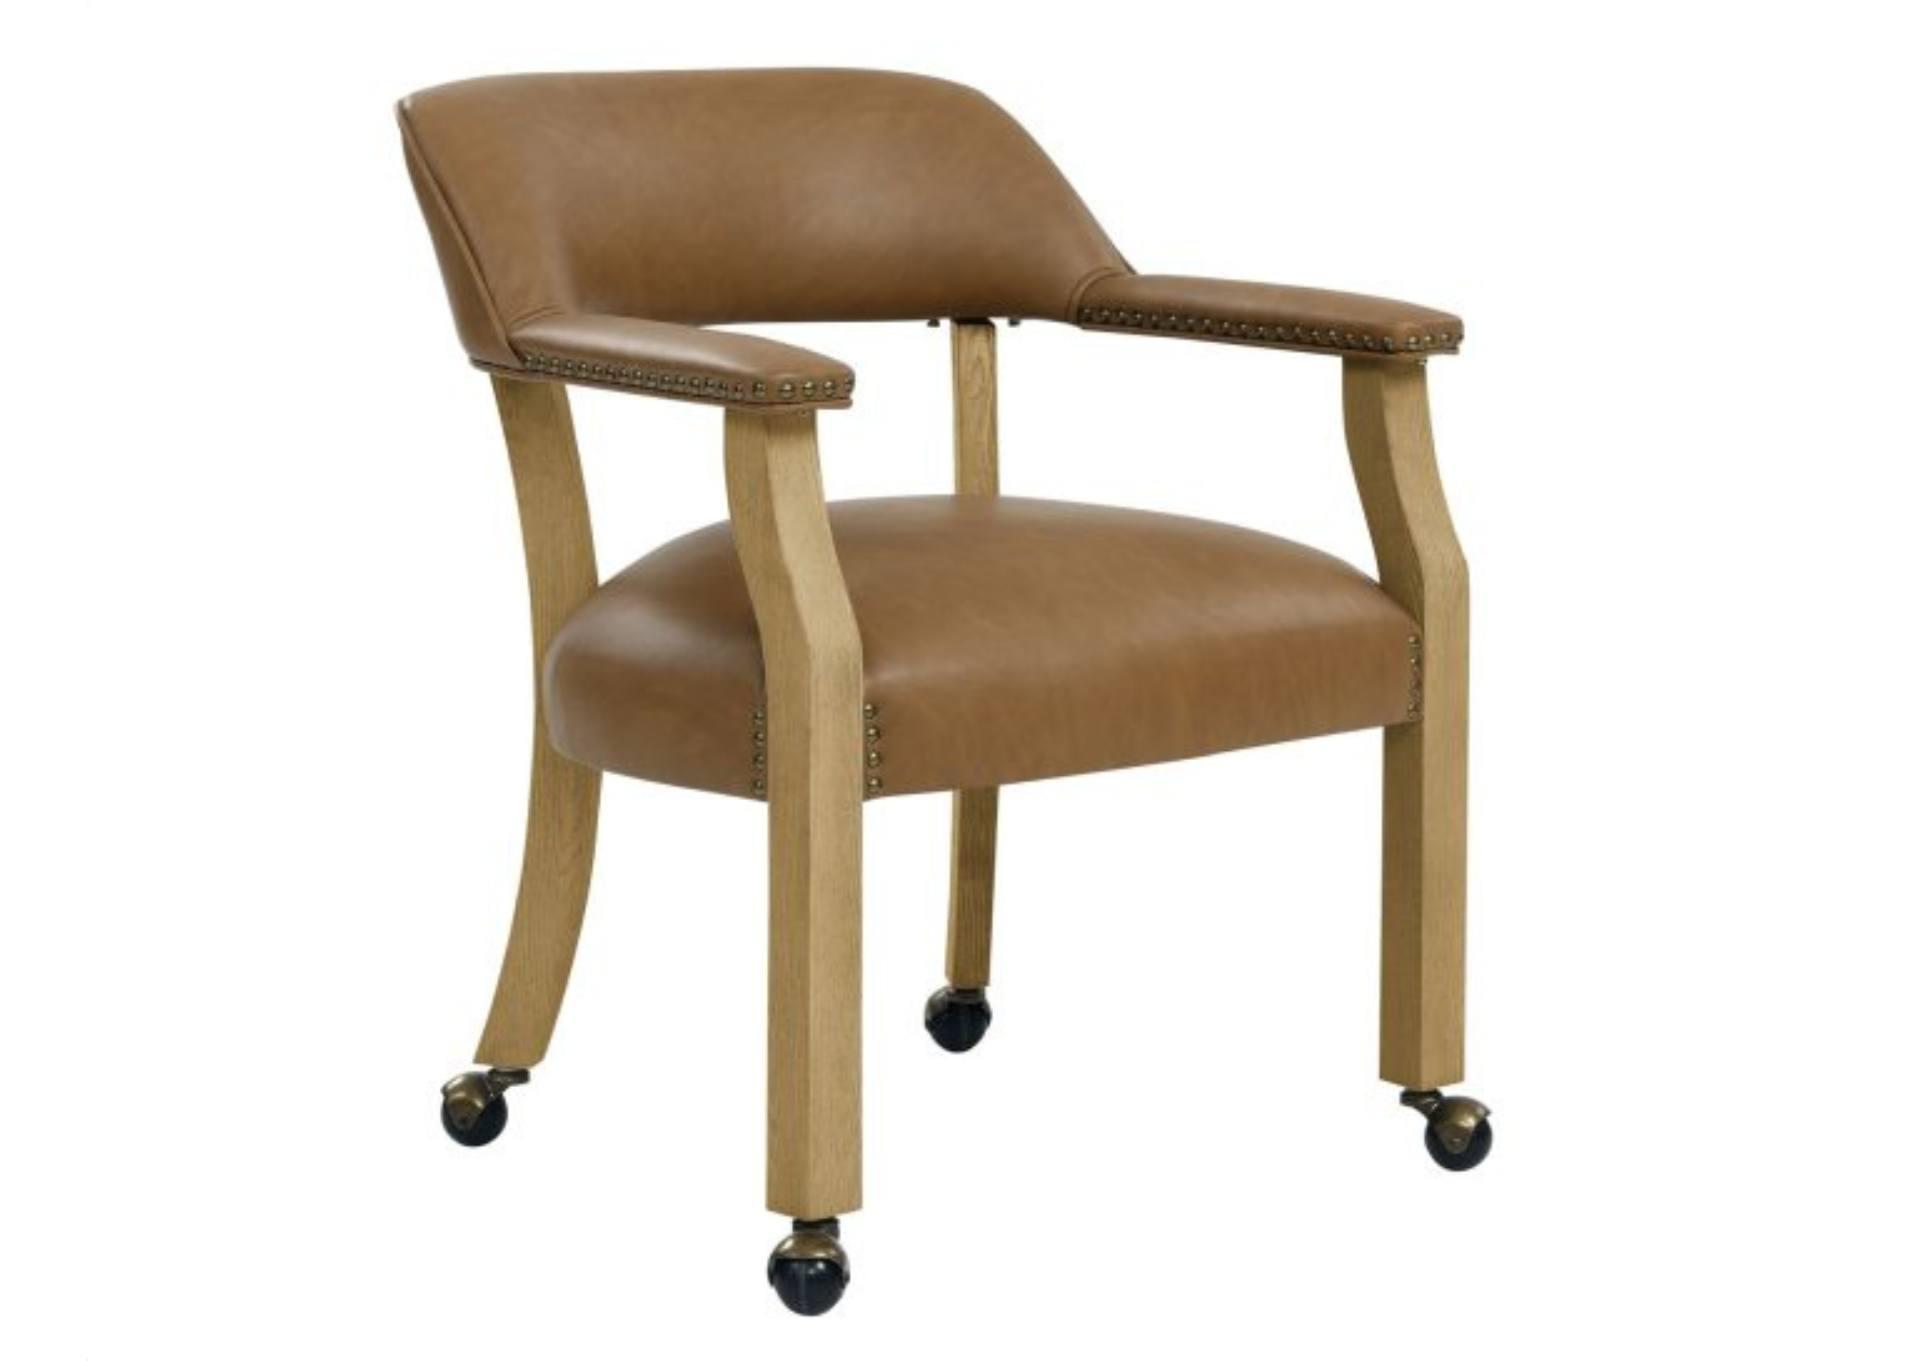 RYLIE DINING ARM CHAIR WITH CASTERS,STEVE SILVER COMPANY